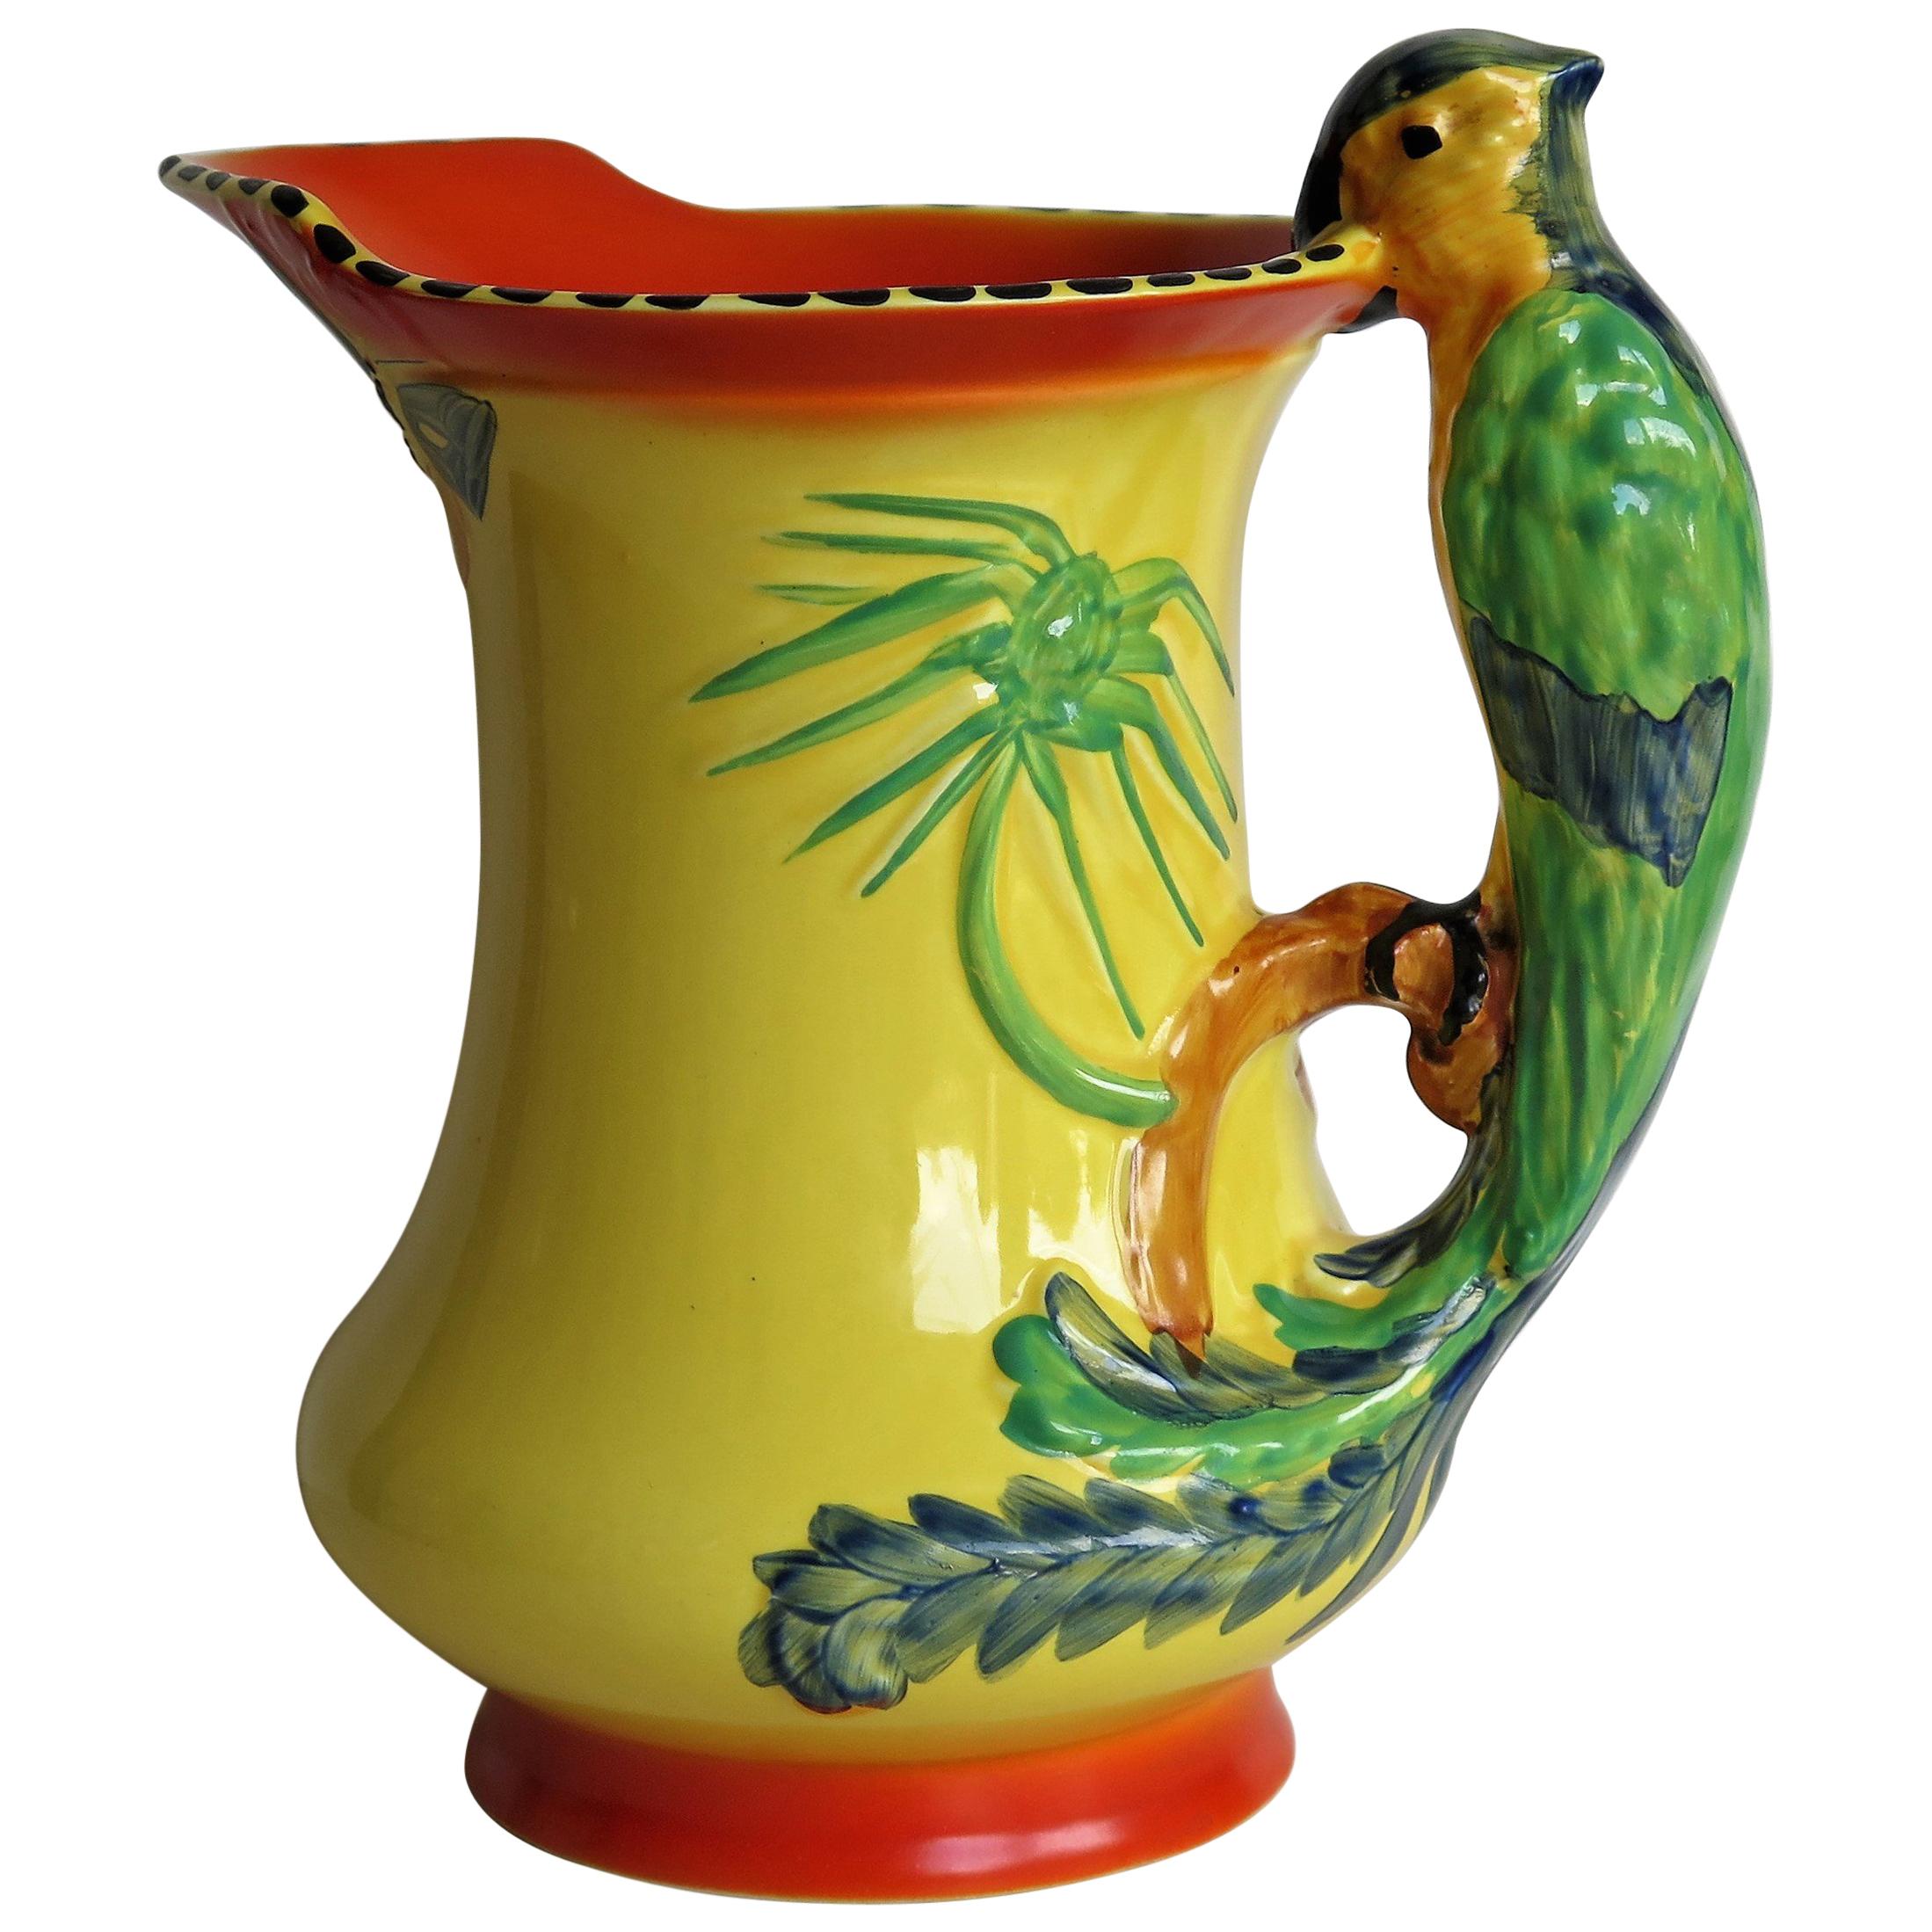 Art Deco Burleigh Ware Pottery Jug or Pitcher Parrot Handle Hand-Painted, 1930s